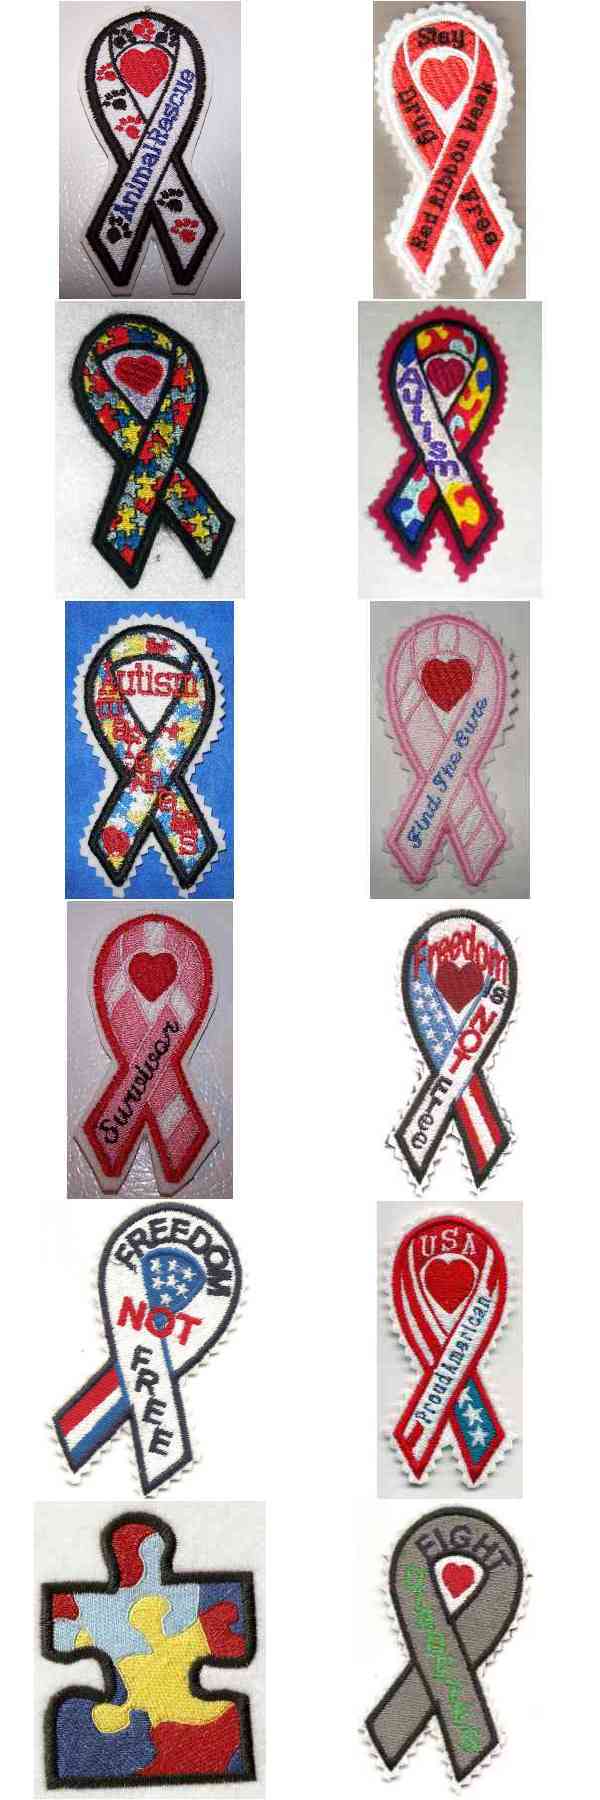 Awareness Ribbons Embroidery Machine Design Details